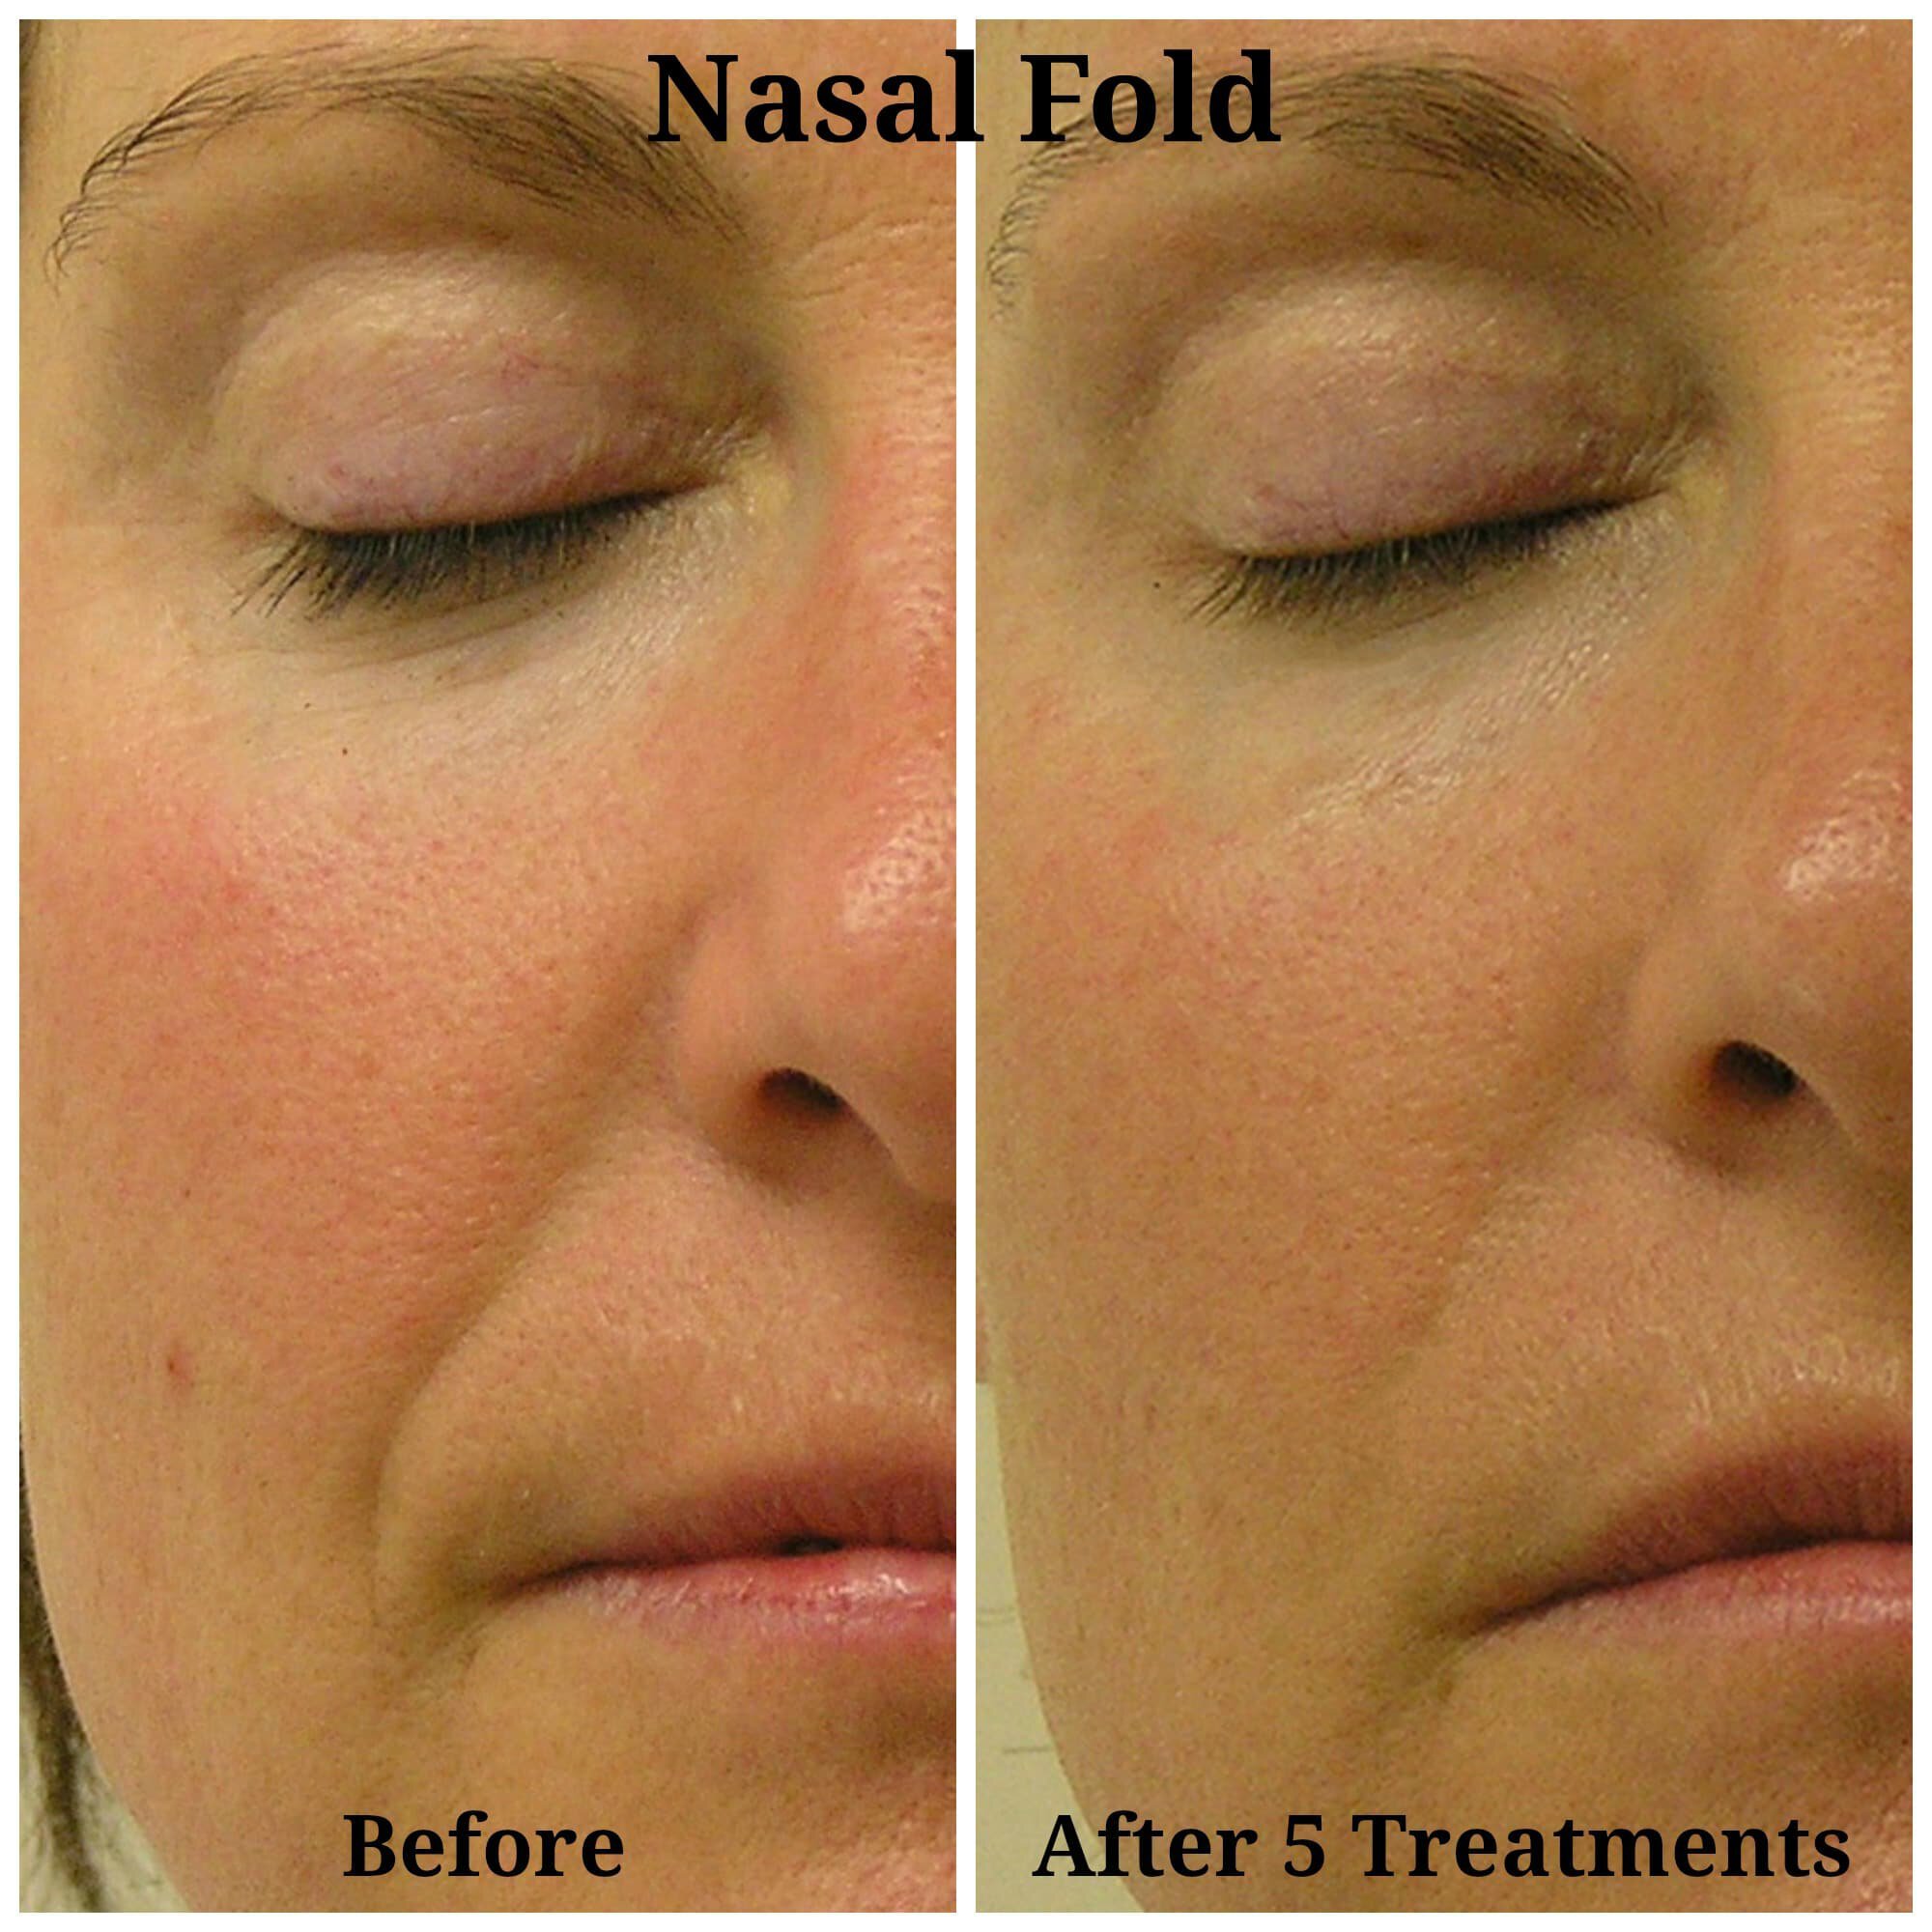 Nasal-Fold-Before-After1